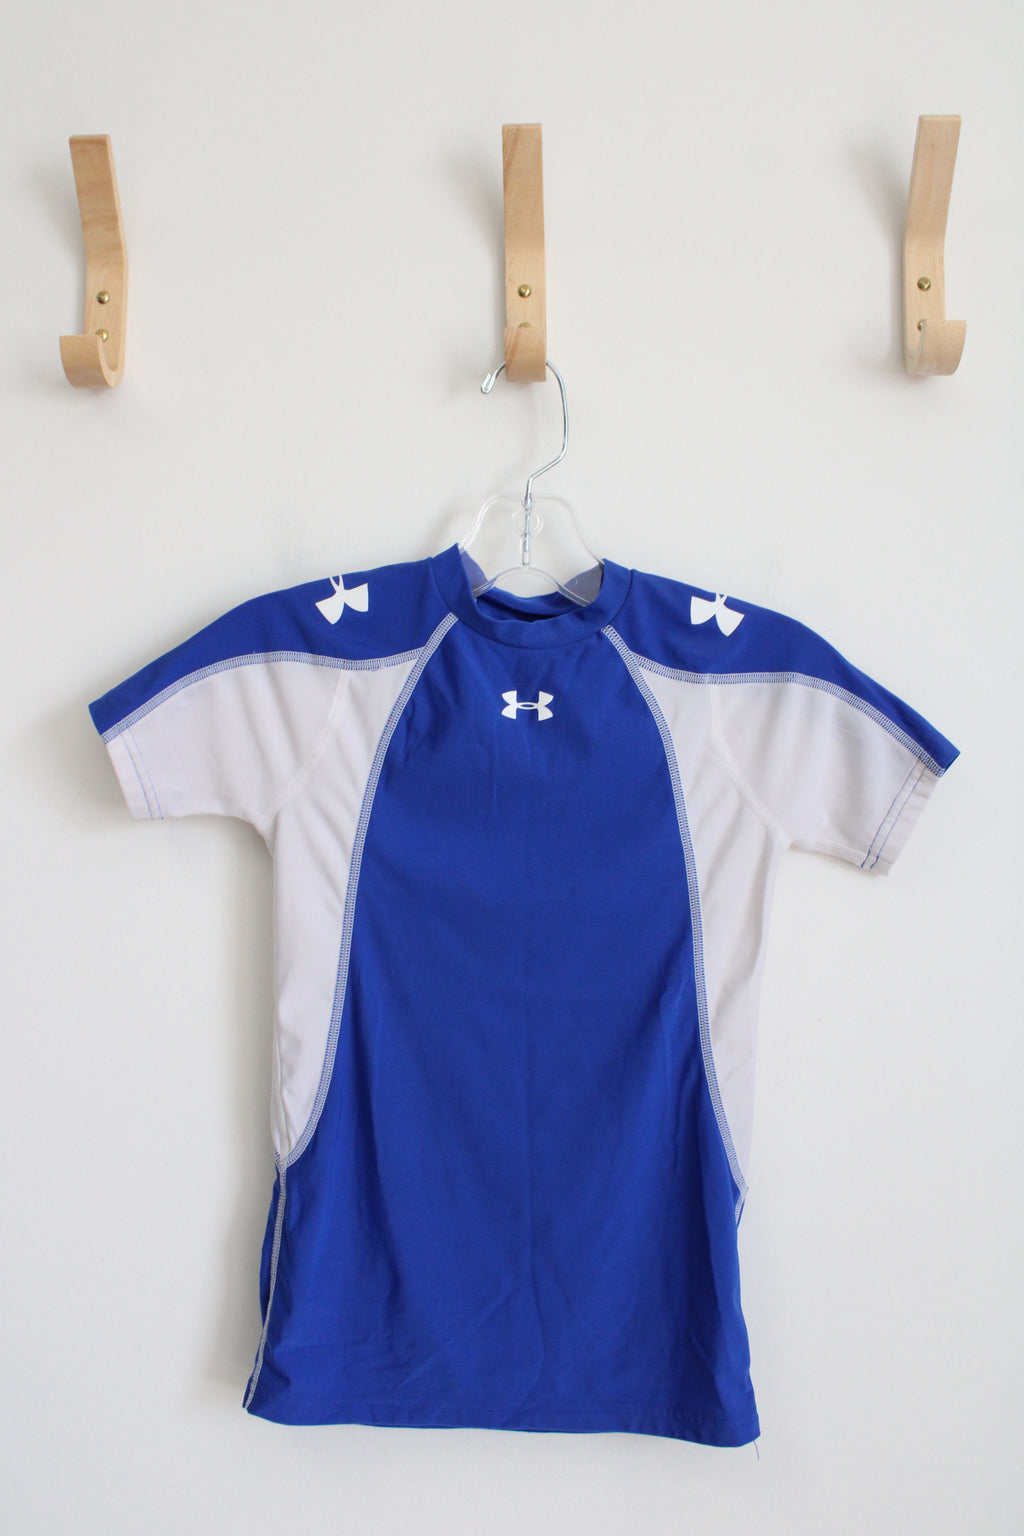 Under Armour Heat Gear Blue and White Top | Youth M